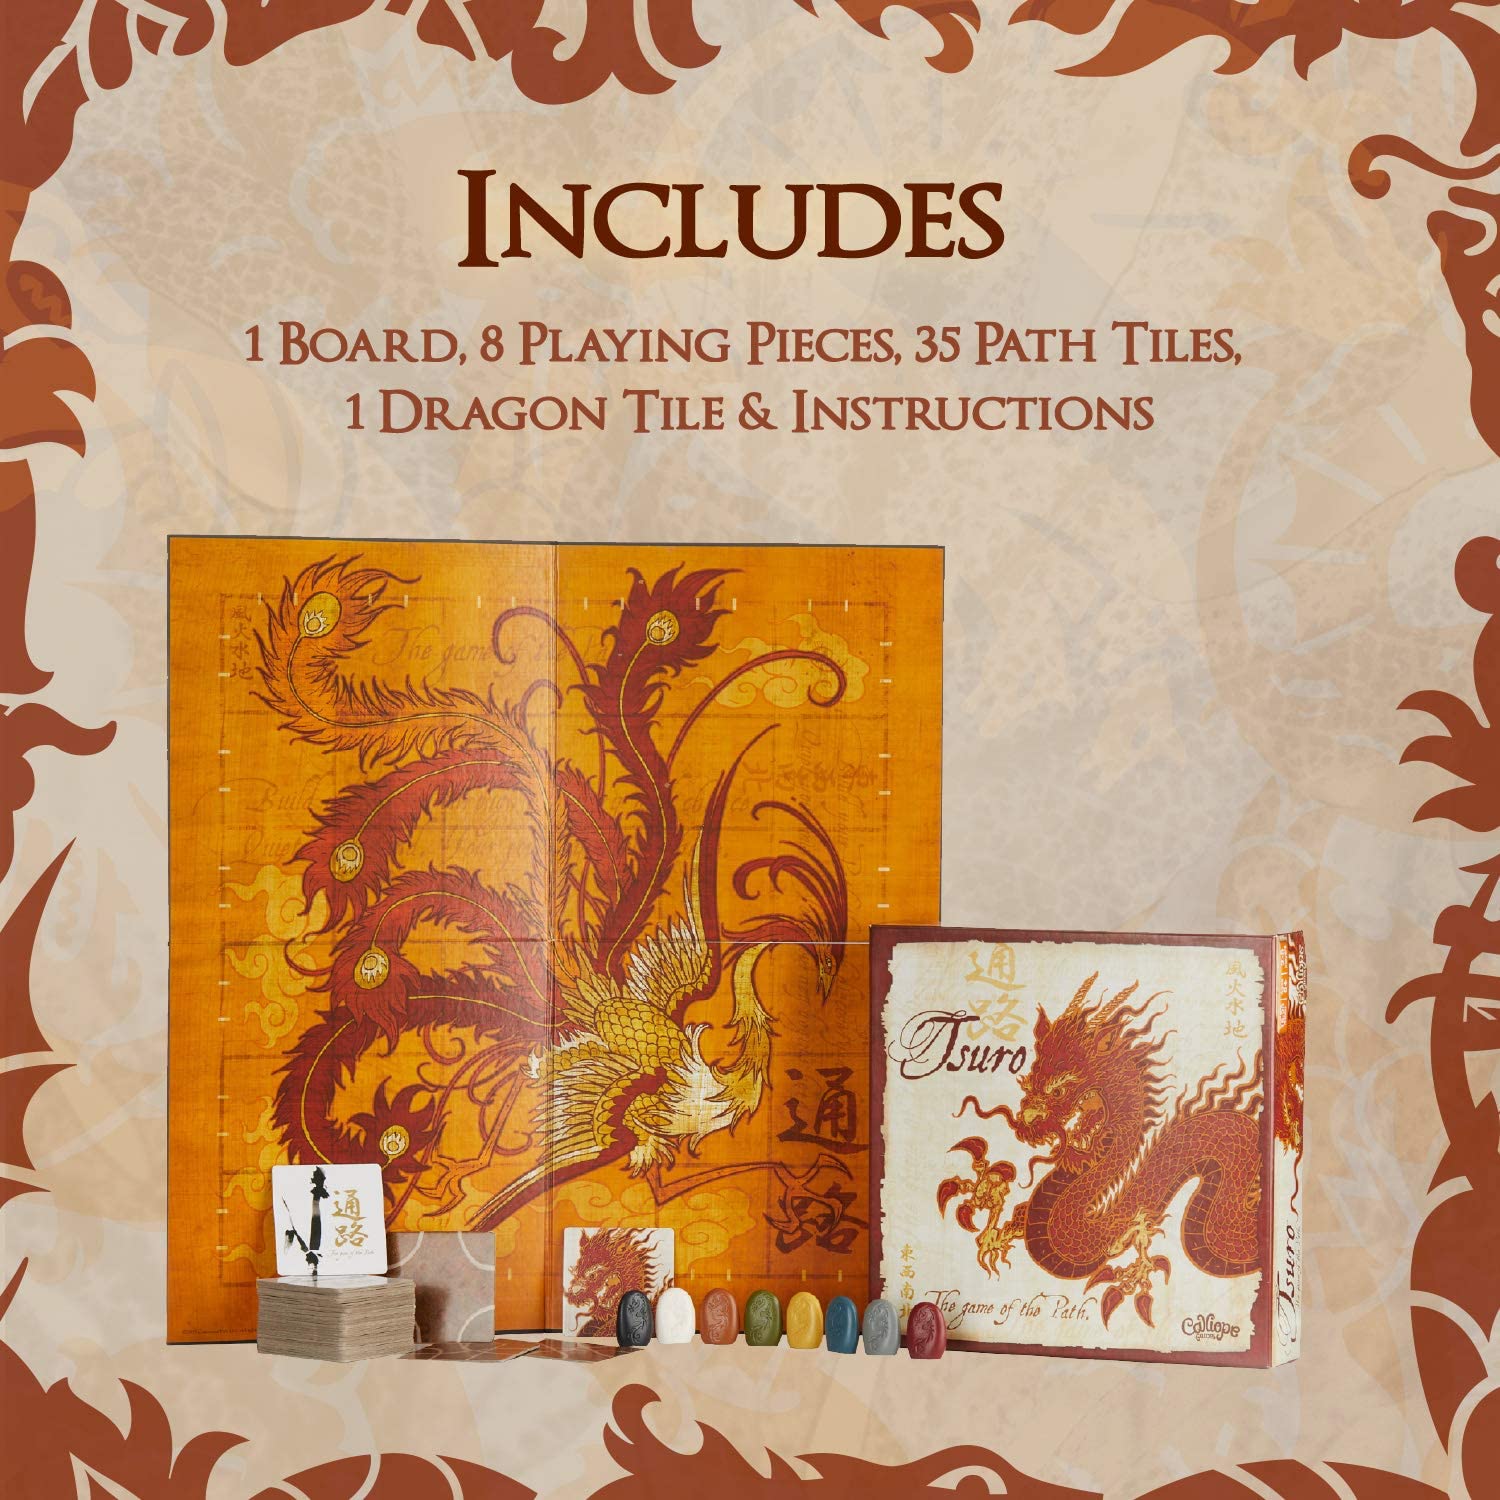 Tsuro: The Game of the Path - Master Your Journey with Friends & Family - Bards & Cards